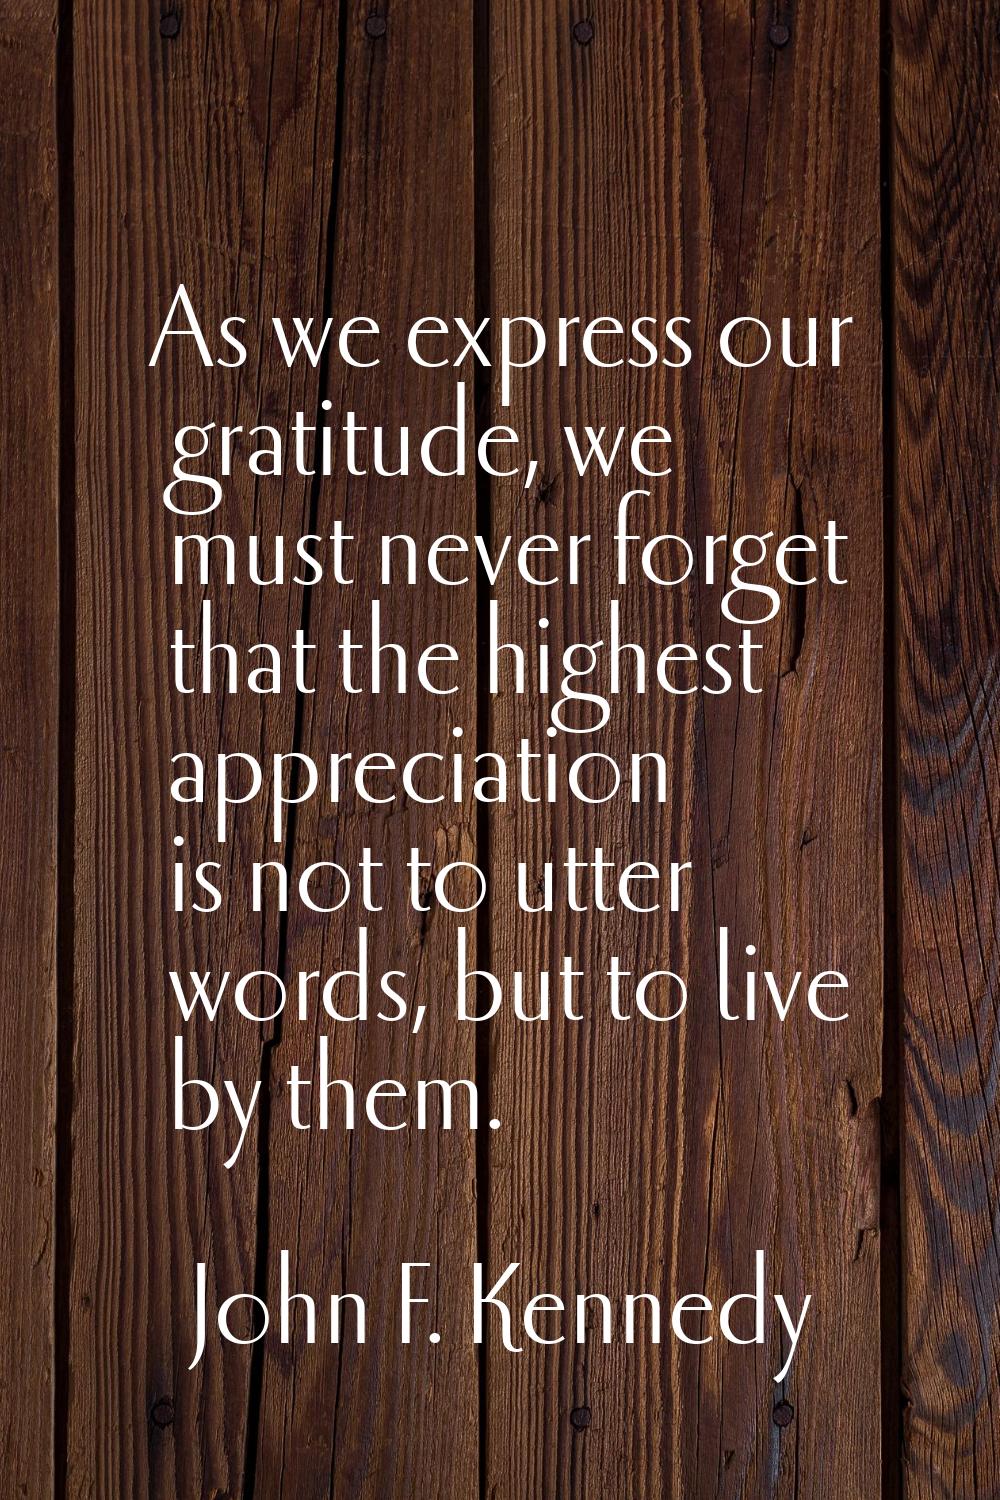 As we express our gratitude, we must never forget that the highest appreciation is not to utter wor